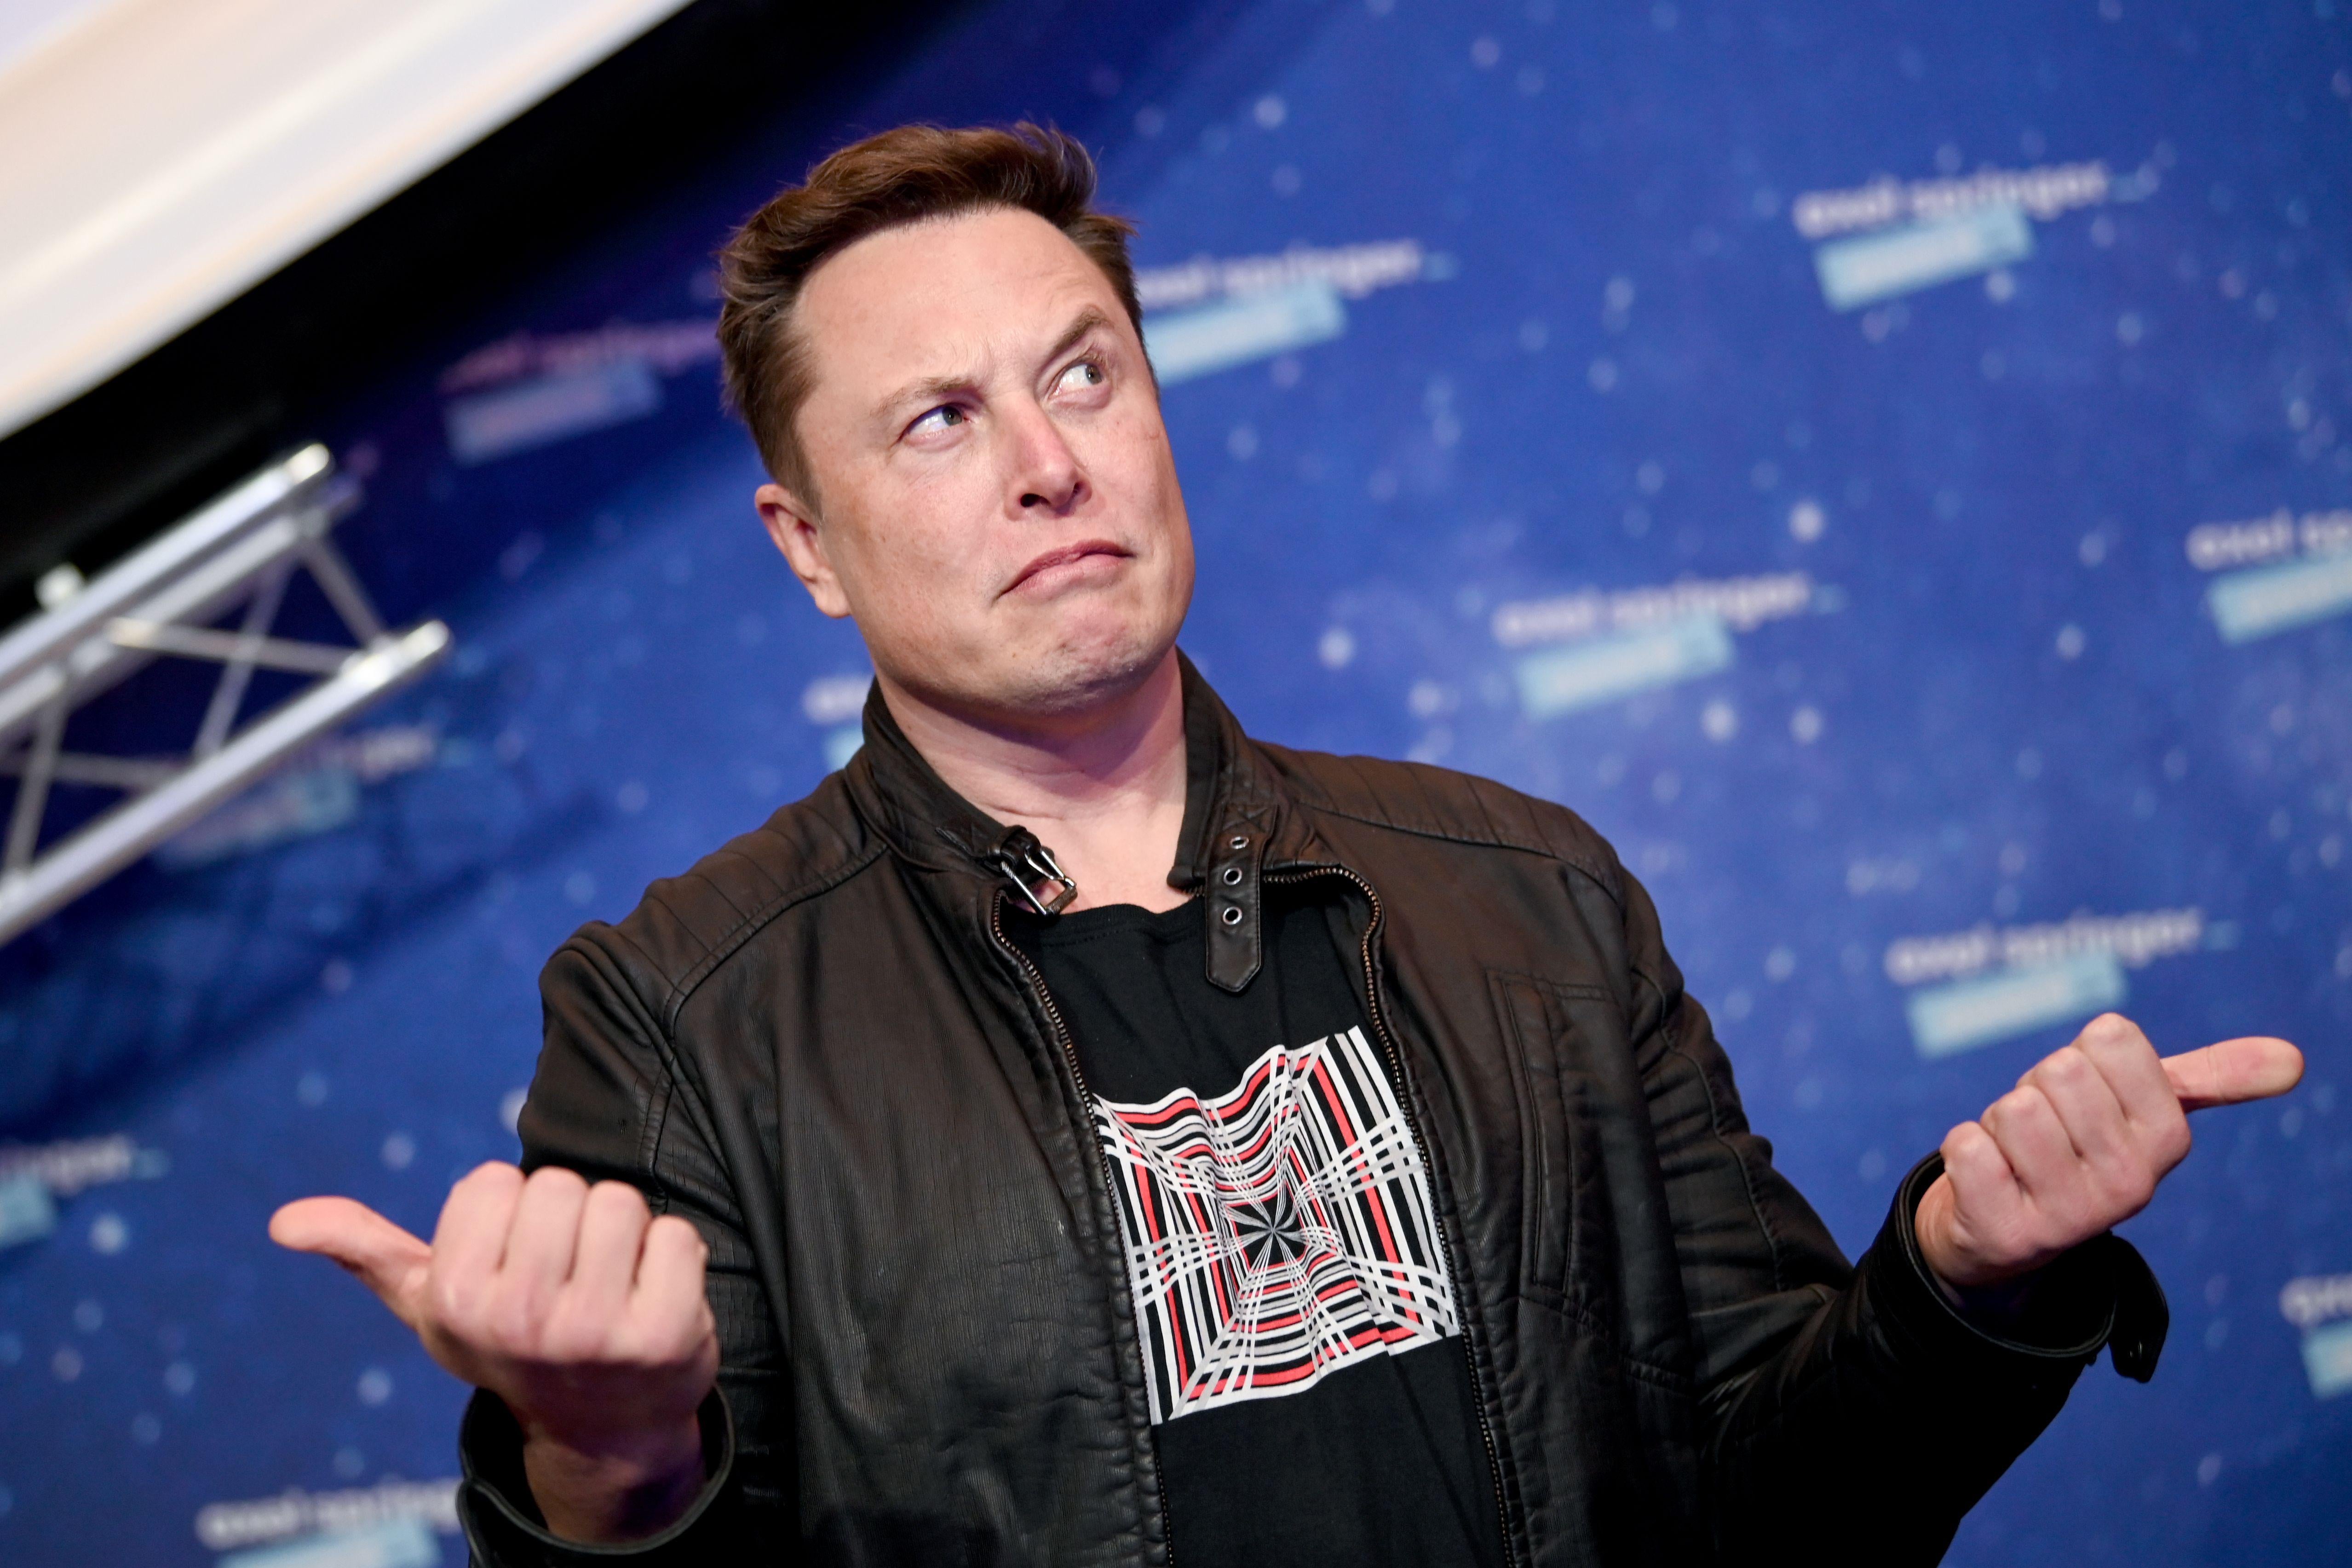 Elon Musk, onstage at an event, points his thumbs in two separate directions.